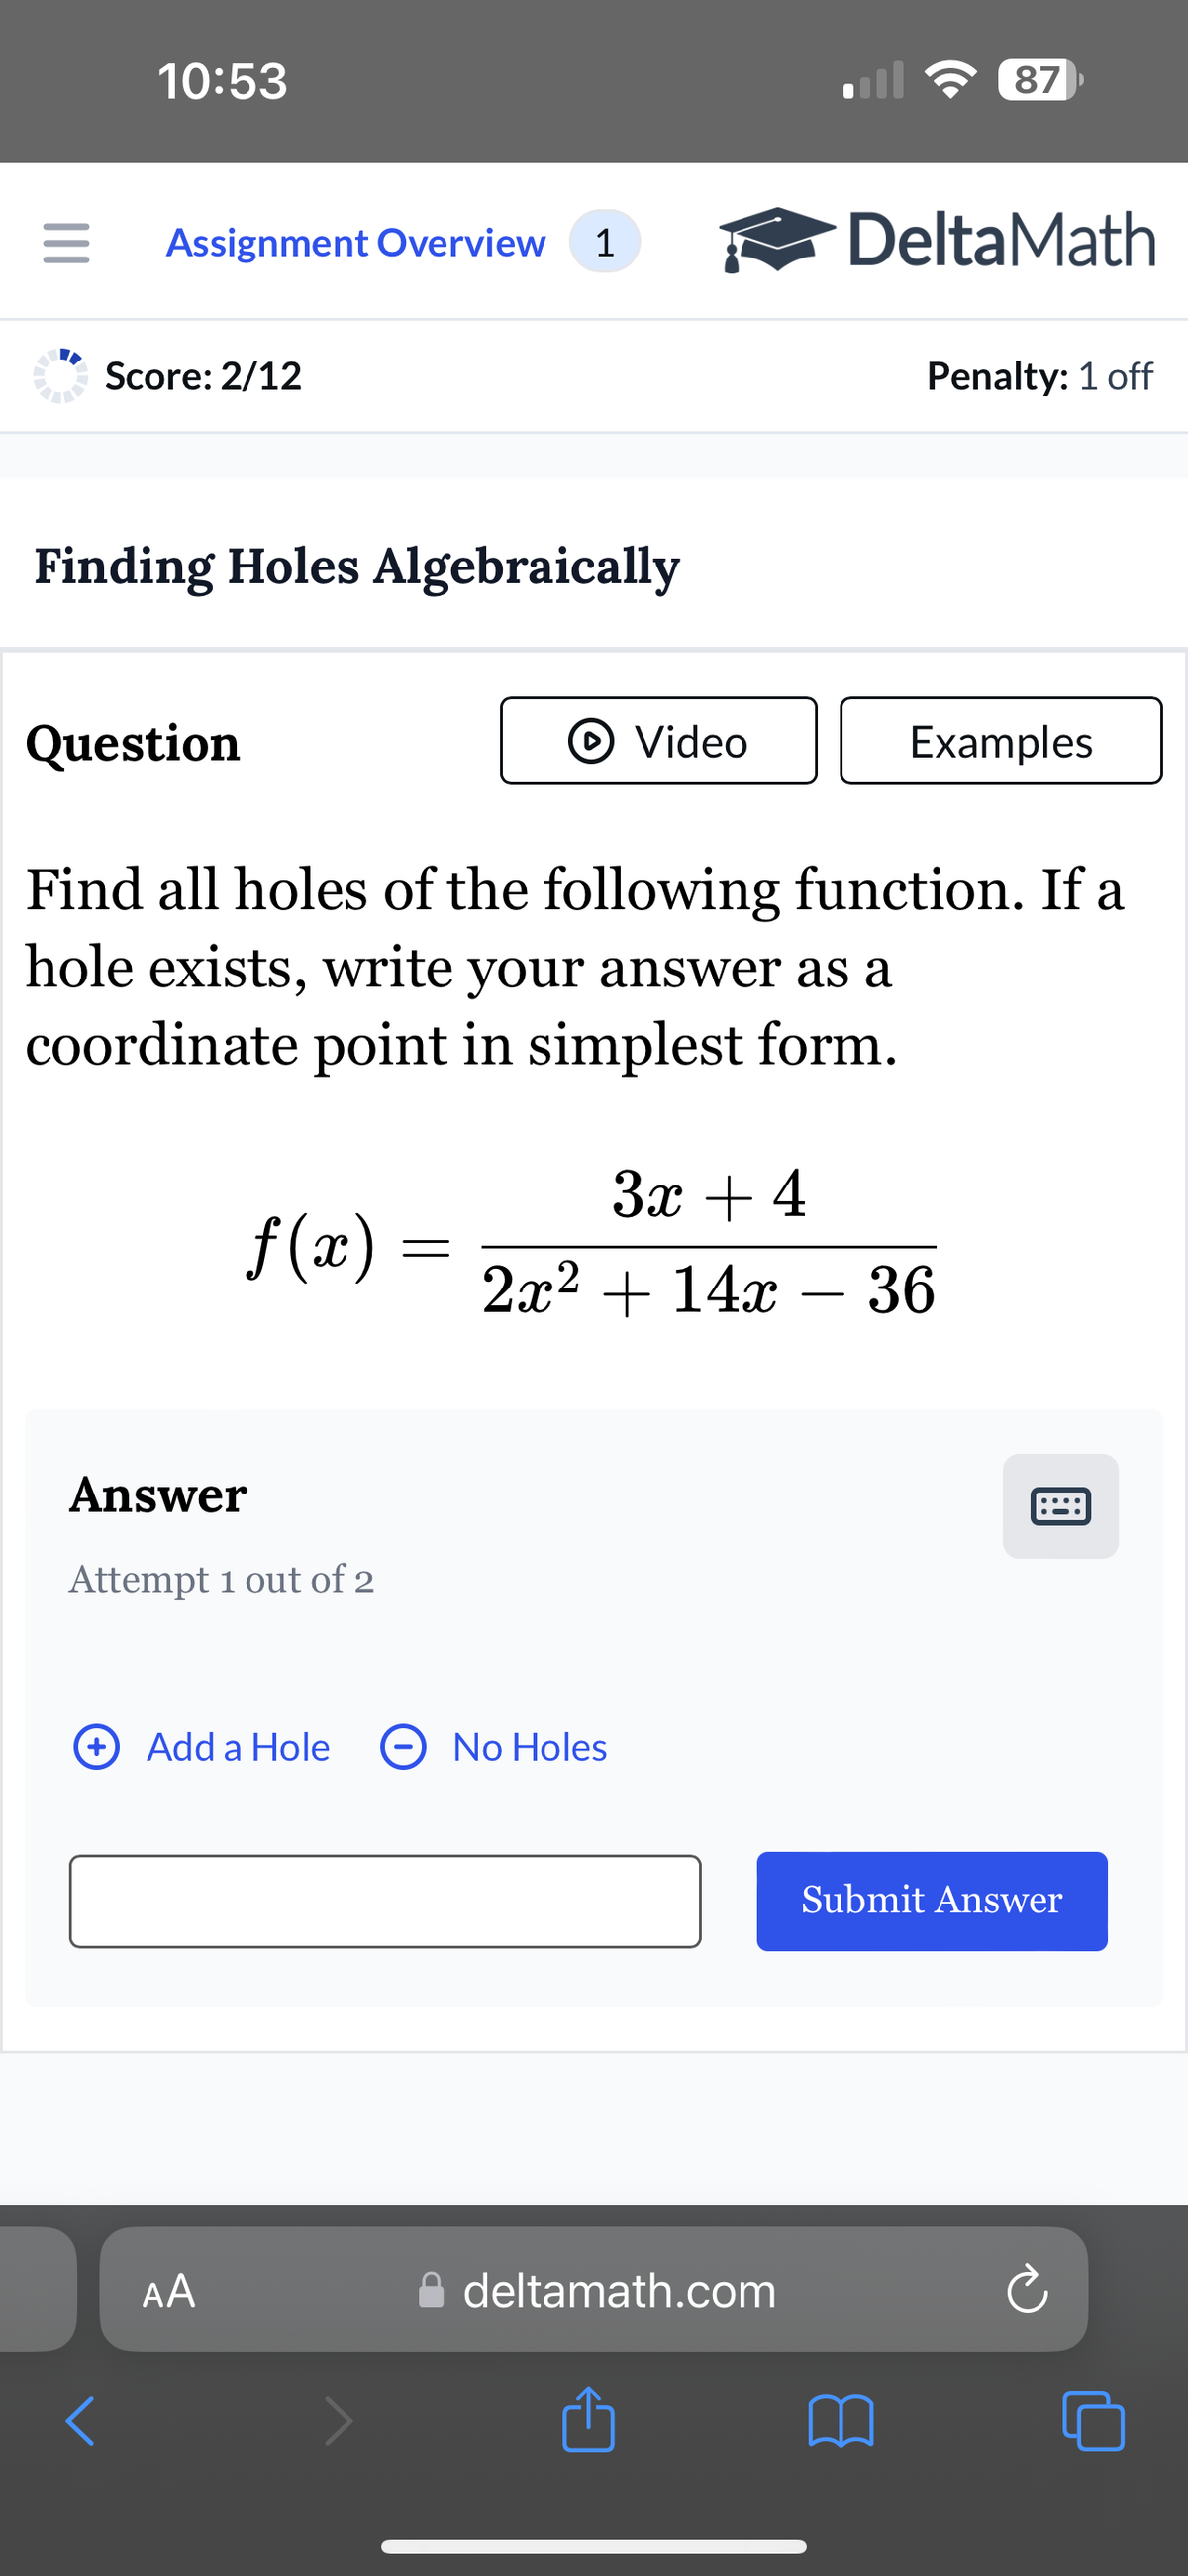 10:53
87
Assignment Overview 1
DeltaMath
Score: 2/12
Penalty: 1 off
Finding Holes Algebraically
Question
Video
Examples
Find all holes of the following function. If a
hole exists, write your answer as a
coordinate point in simplest form.
3x + 4
f(x) =
=
2x214x36
Answer
Attempt 1 out of 2
Add a Hole
No Holes
AA
A deltamath.com
1
Submit Answer